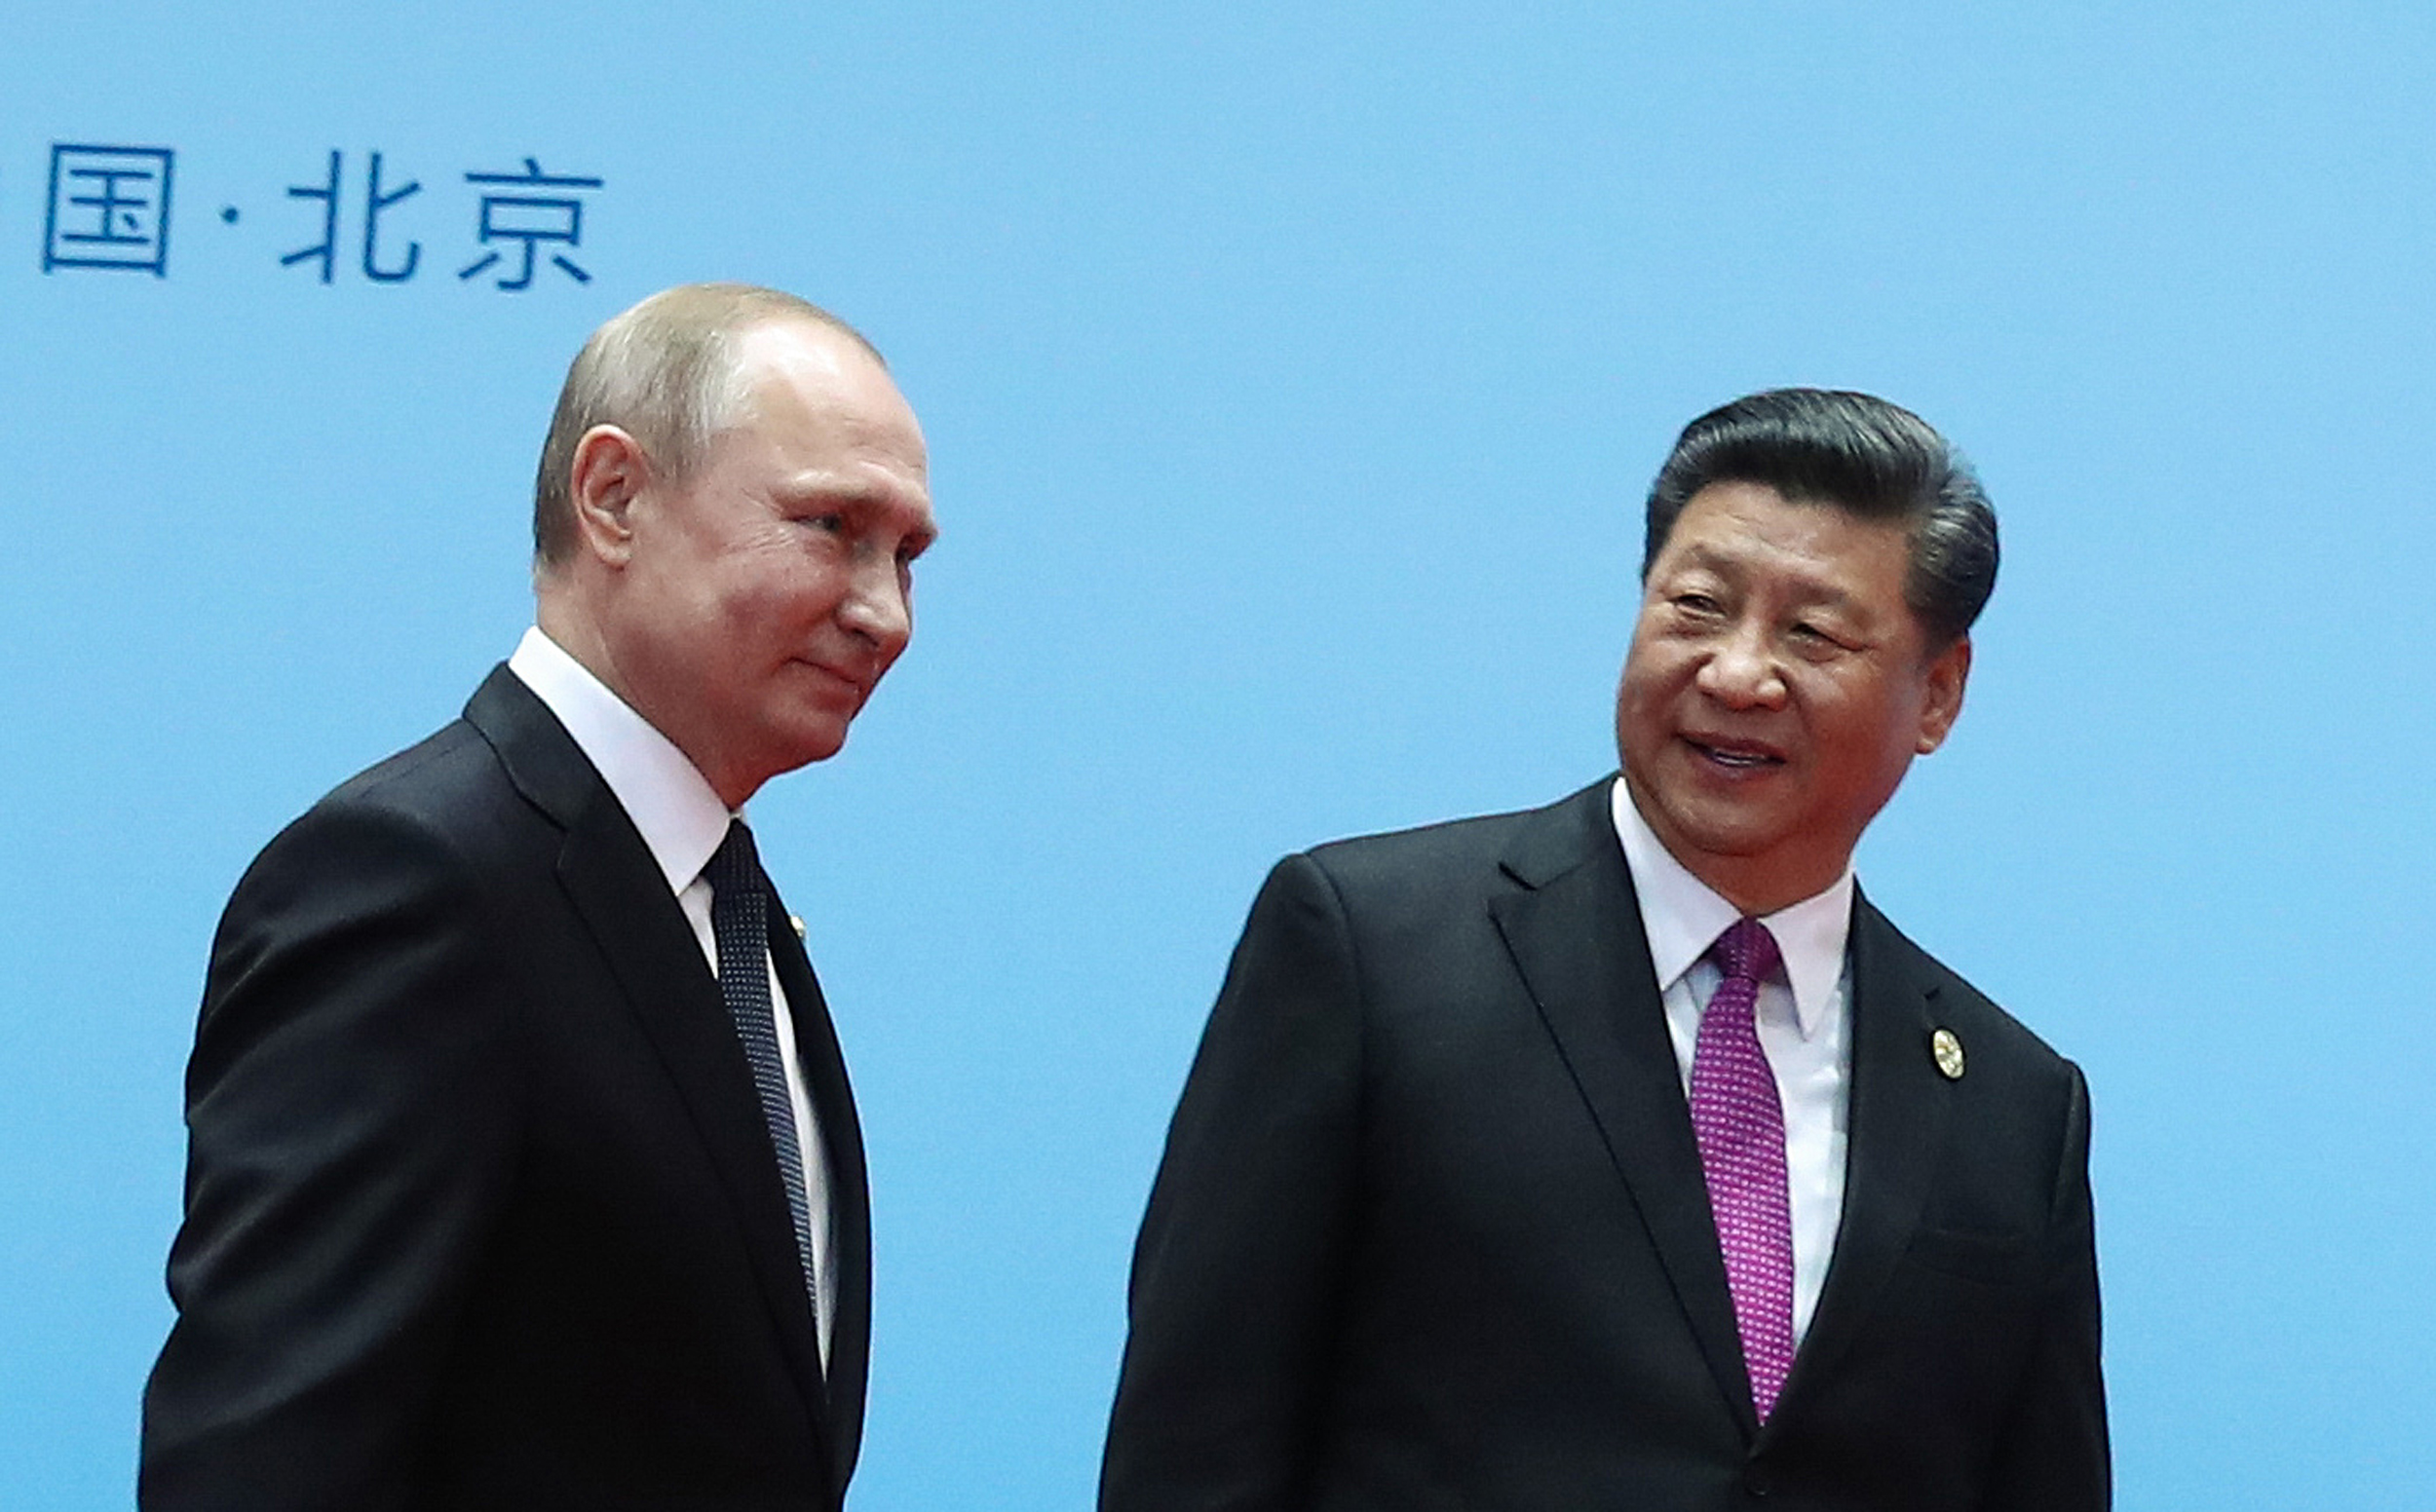 TOPSHOT - China's President Xi Jinping (R) and Russia's President Vladimir Putin smile during the welcoming ceremony on the final day of the Belt and Road Forum in Beijing on April 27, 2019. - Chinese President Xi Jinping urged dozens of world leaders on April 27 to reject protectionism and invited more countries to participate in his global infrastructure project after seeking to ease concerns surrounding the programme. (Photo by Valery SHARIFULIN / Sputnik / AFP) (Photo by VALERY SHARIFULIN/Sputnik/AFP via Getty Images)